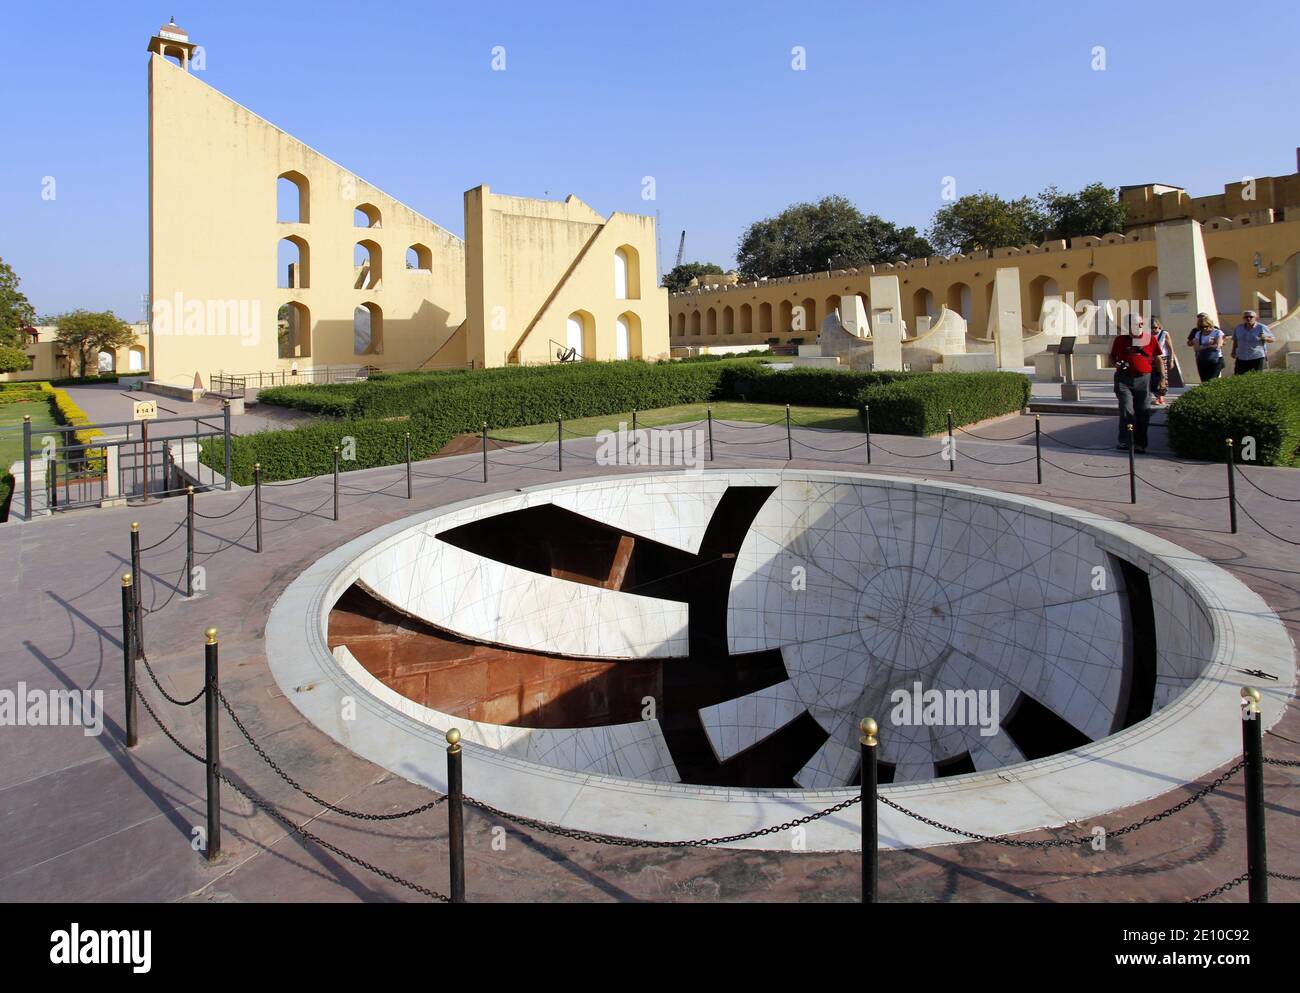 Astronomical Instruments at Jantar Mantar, Jaipur, India, built by Sawai Jai Singh II, the founder of Jaipur, Rajasthan, completed in 1734 Stock Photo